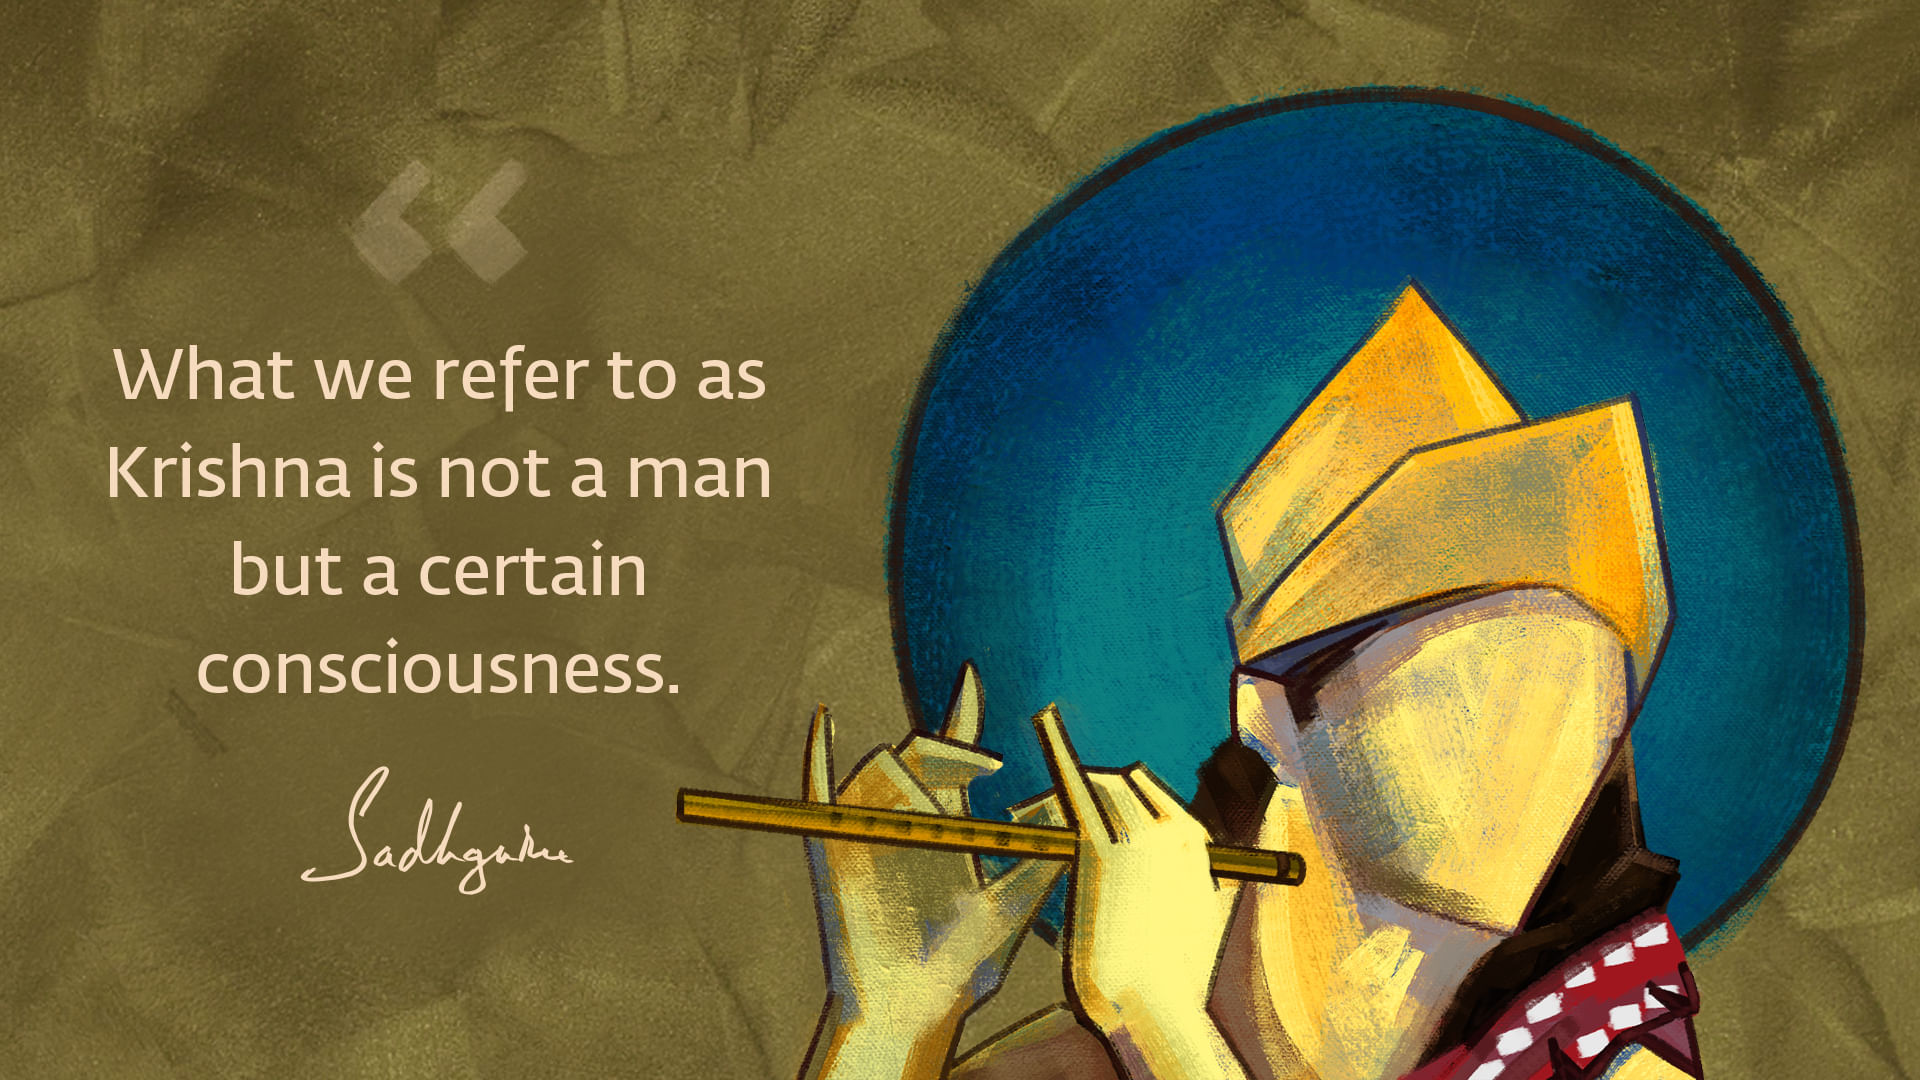 Krishna quote from Sadhguru with abstract Krishna shooting playing flute.